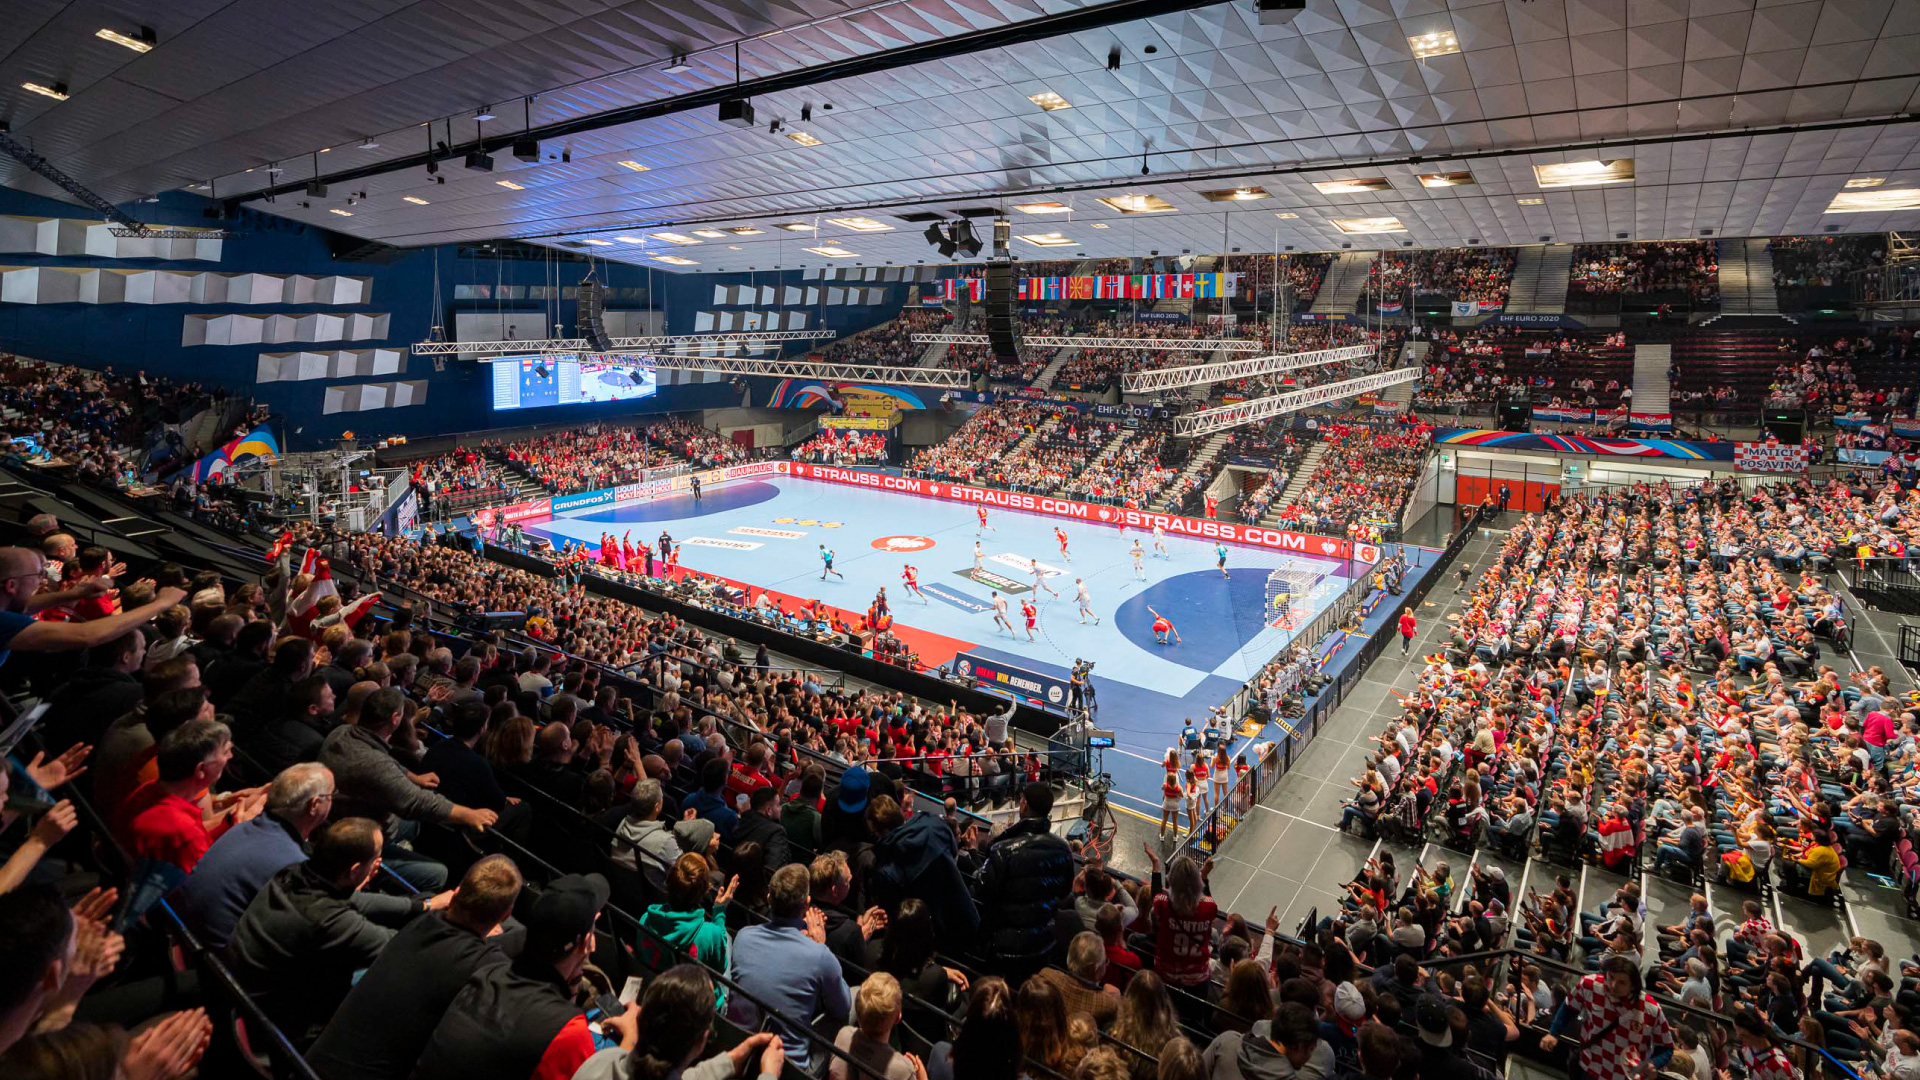 European Handball Championship Vienna 2020 - PRG supplied light, sound and video for this event.